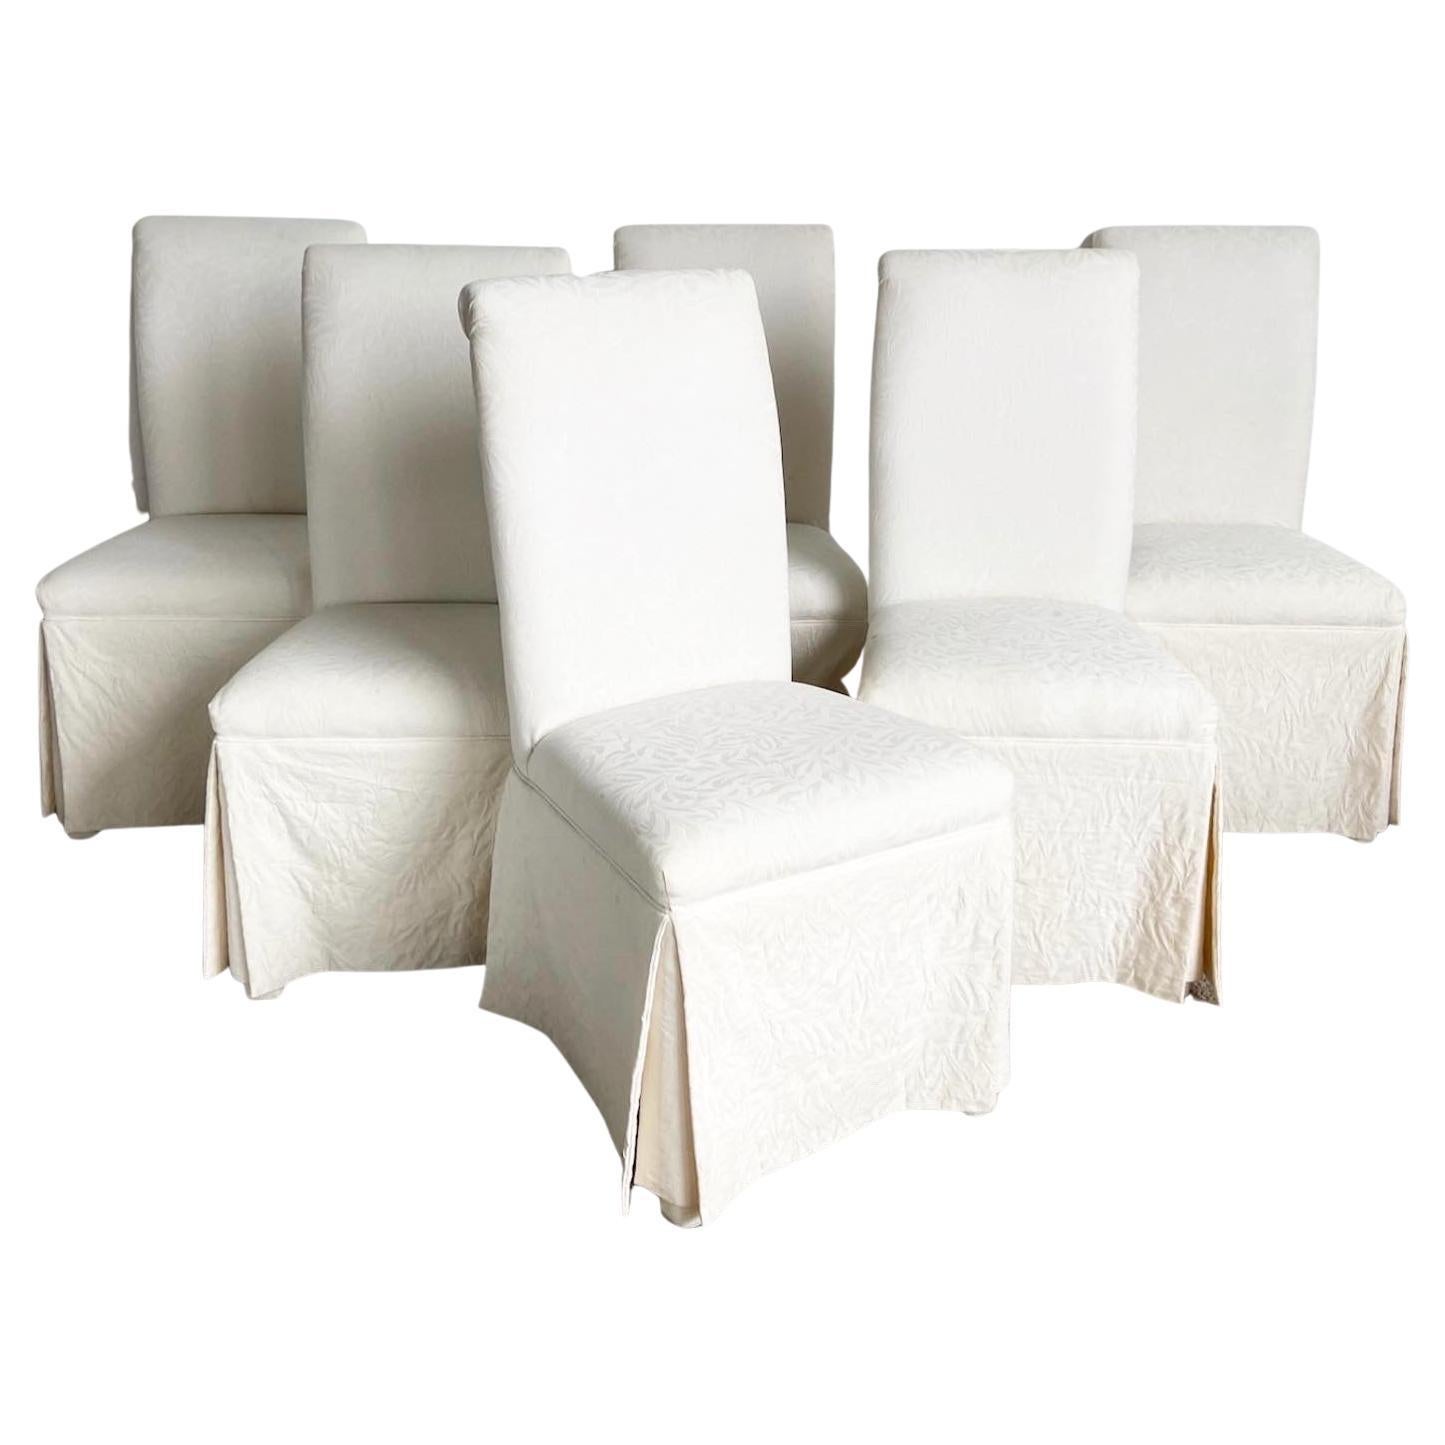 Regency Chic White Skirted Dining Chairs - Set of 6 For Sale